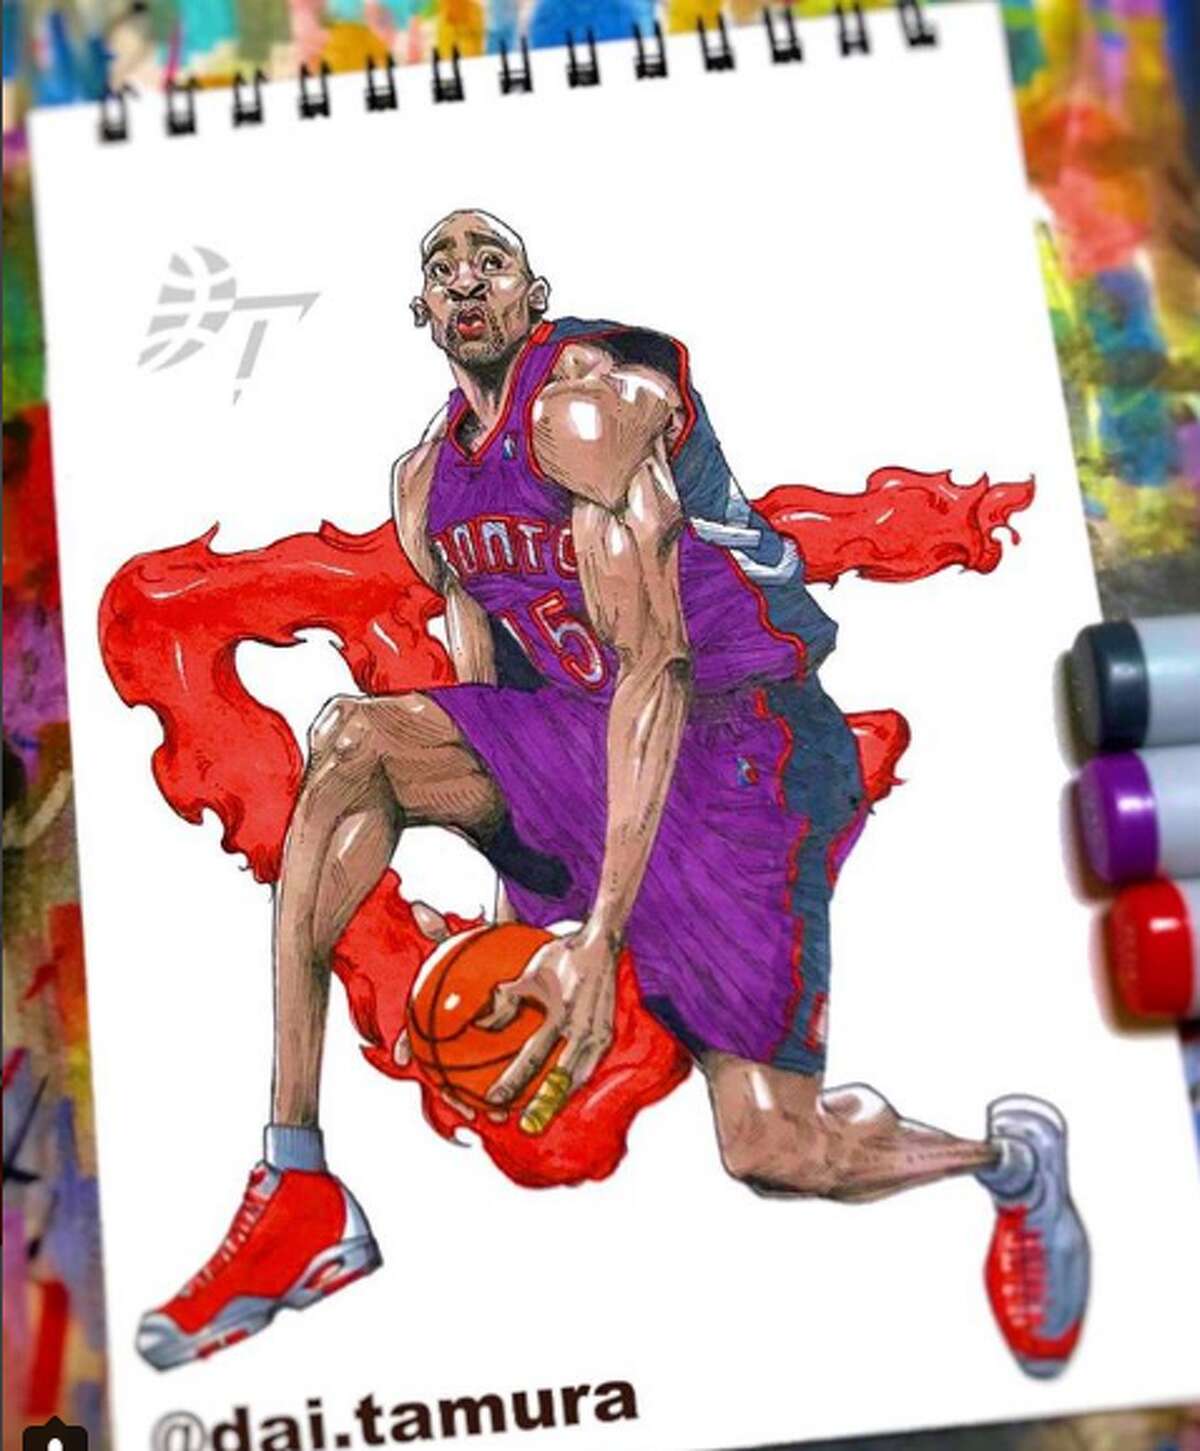 Check out these insane drawings of NBA players